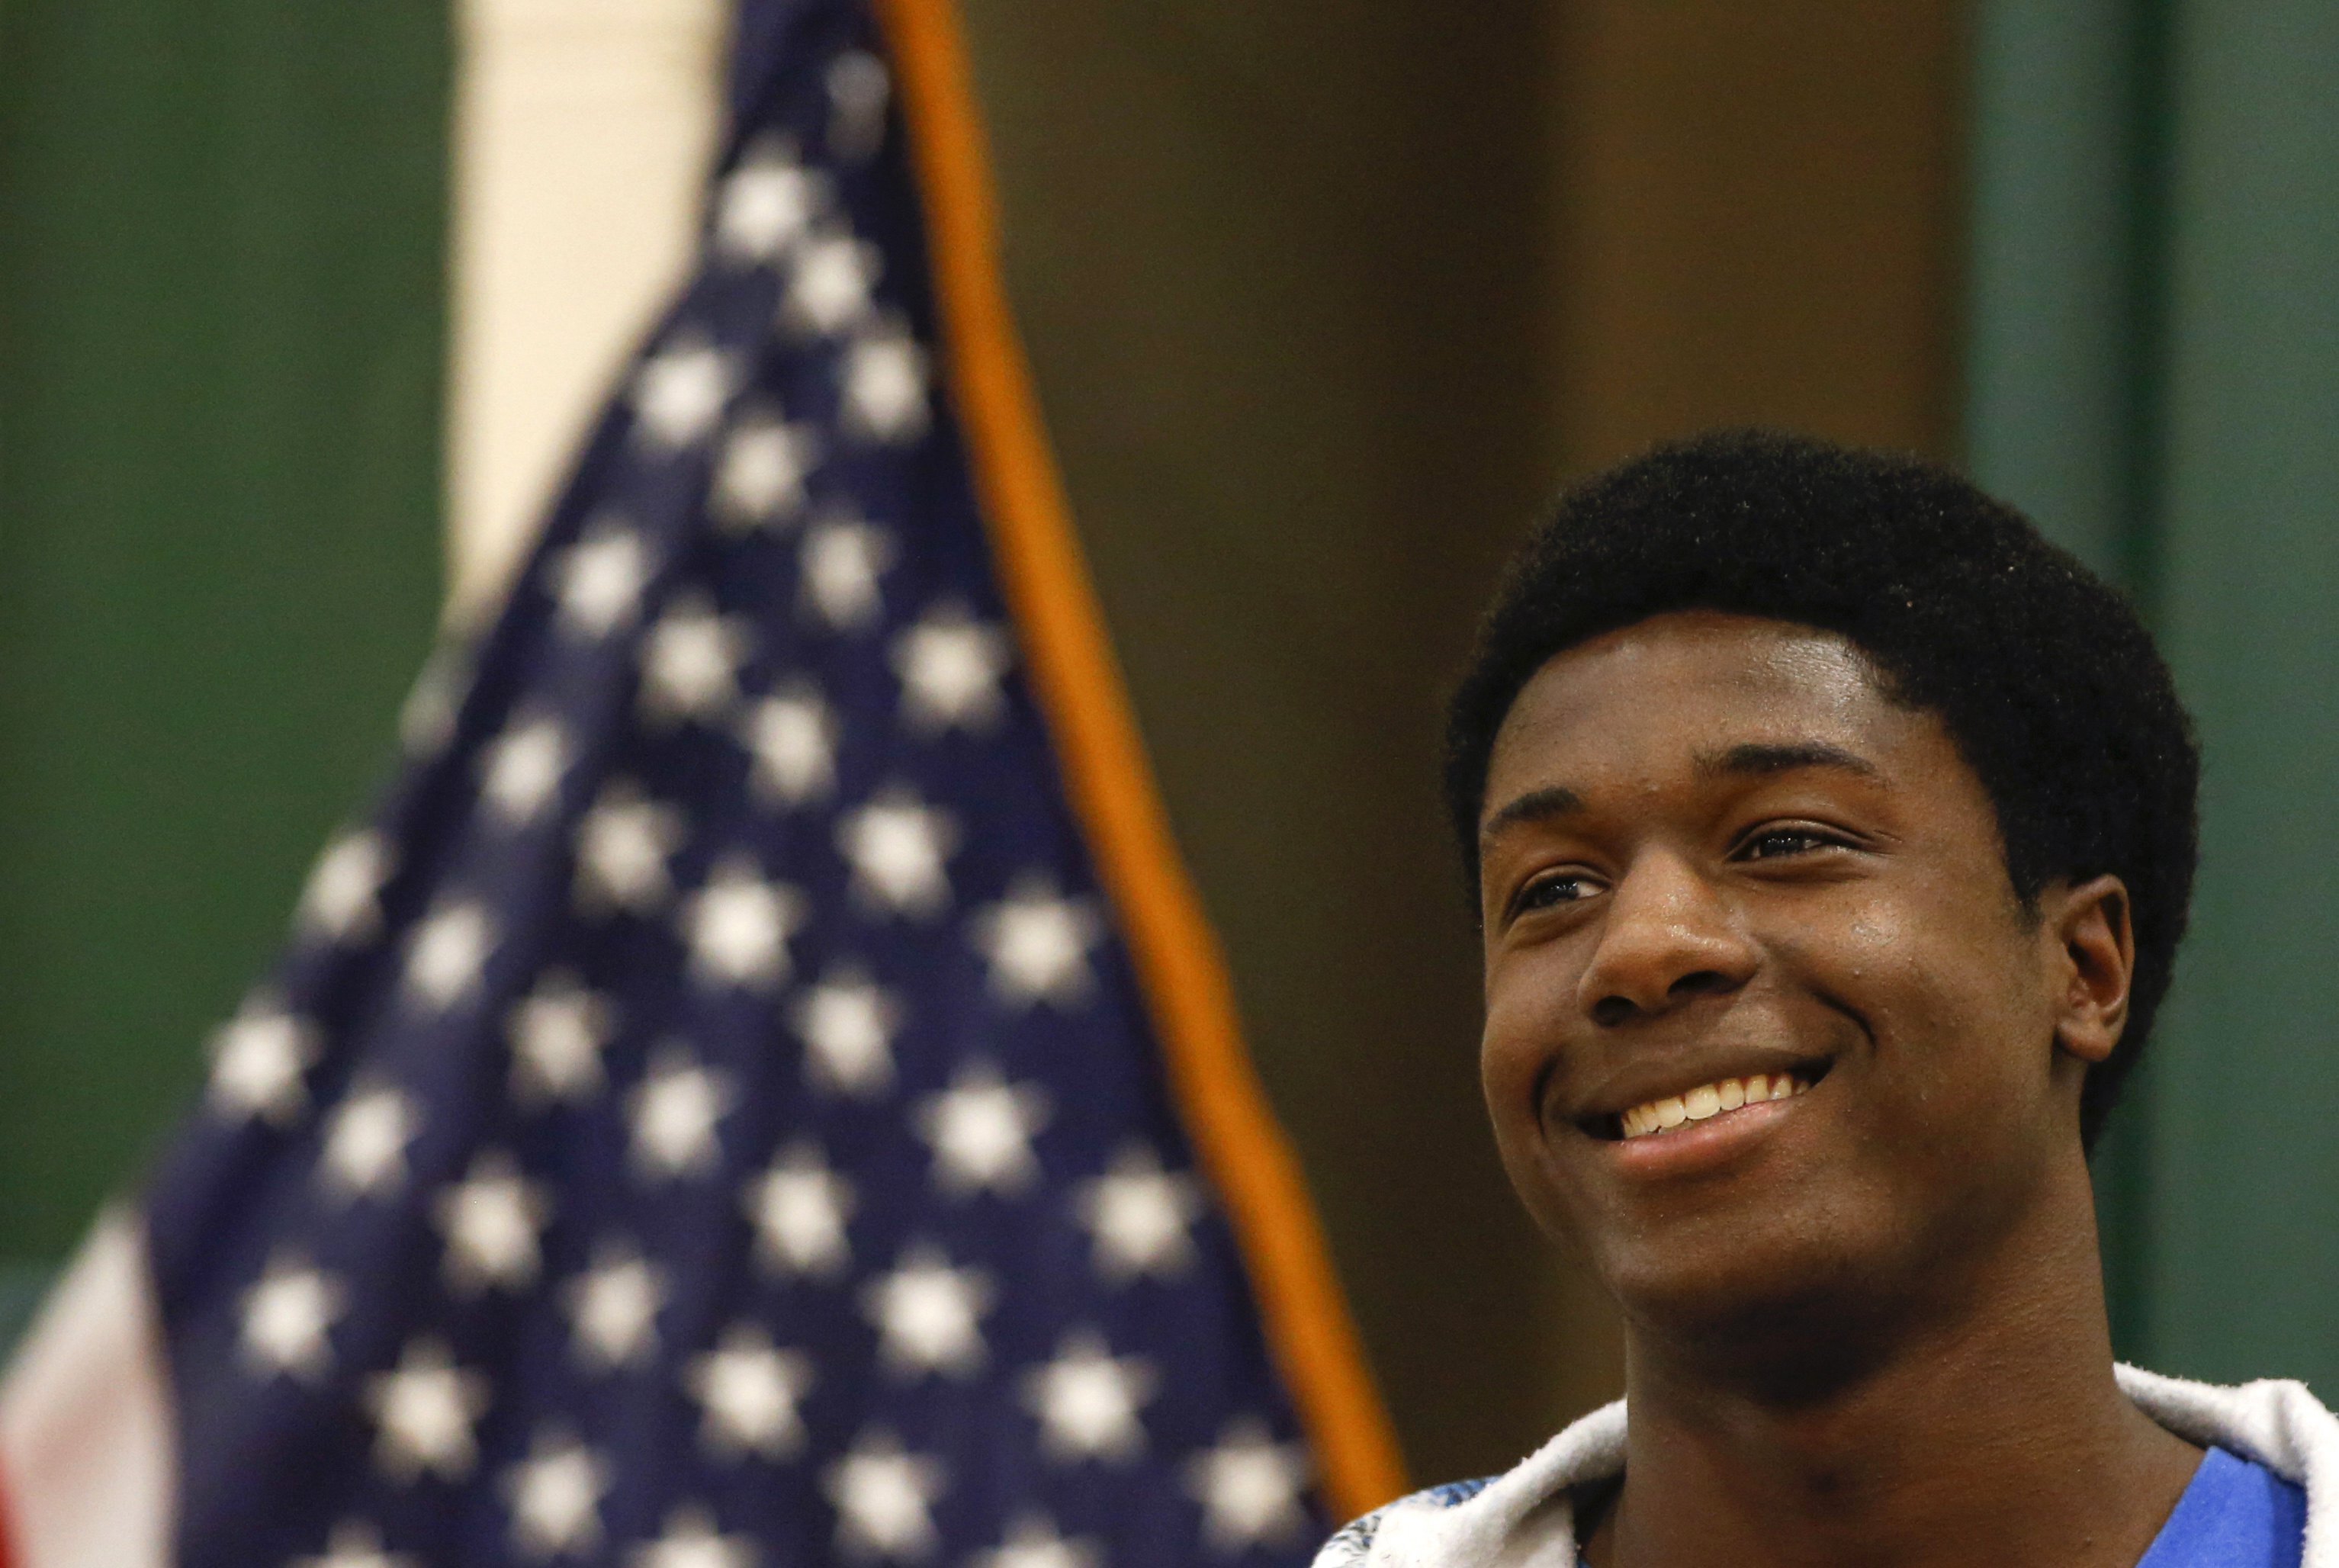 Kwasi Enin, a high school senior, smiles after announcing he will attend Yale University during a press conference at William Floyd High School in Mastic Beach, New York on April 30, 2014. (Shannon Stapleton—Reuters)